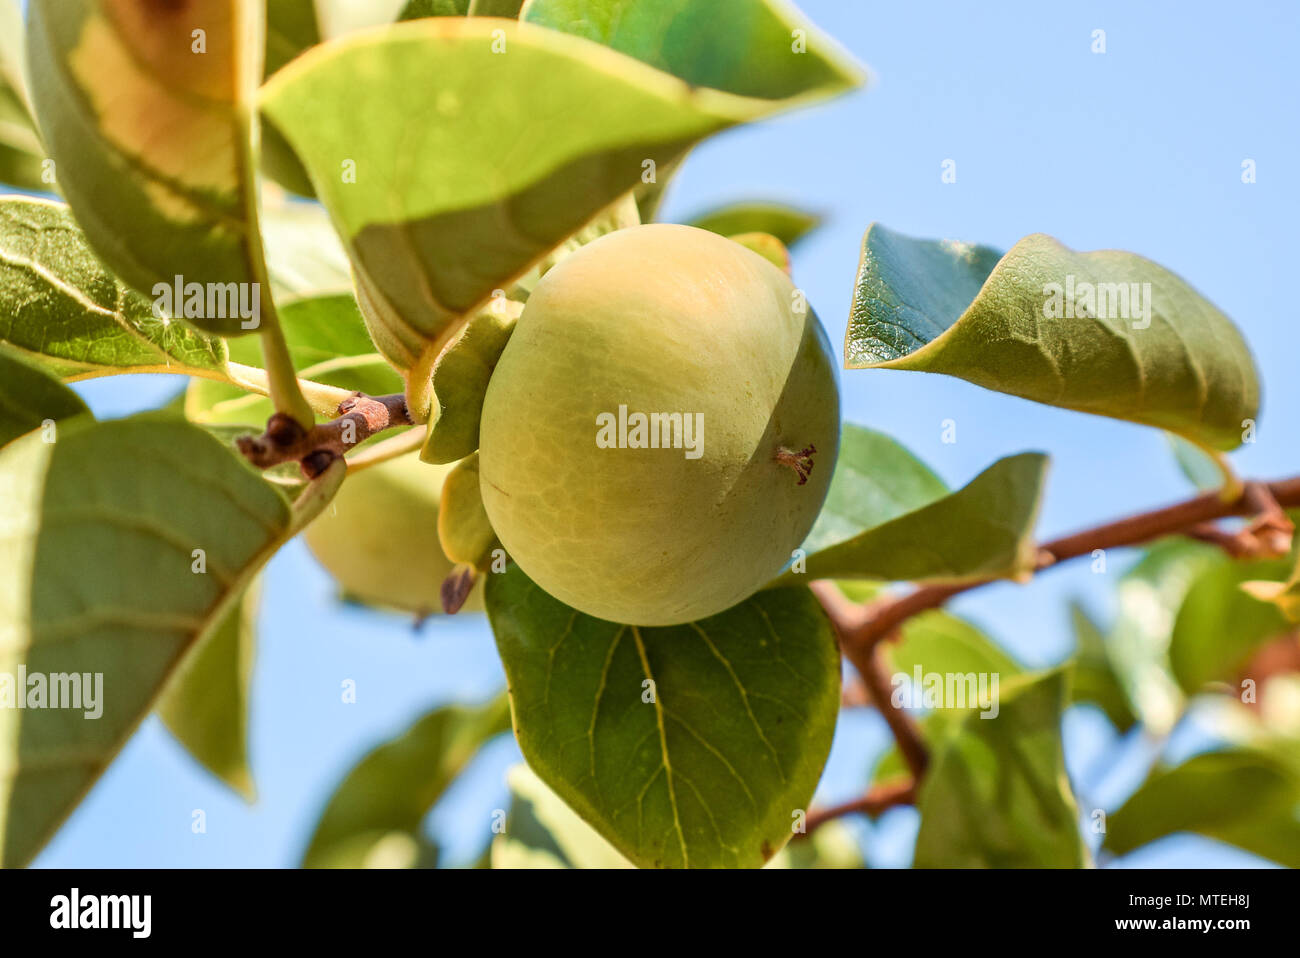 Unripe fruit with green leaves on the tree, natural background, close up image Stock Photo